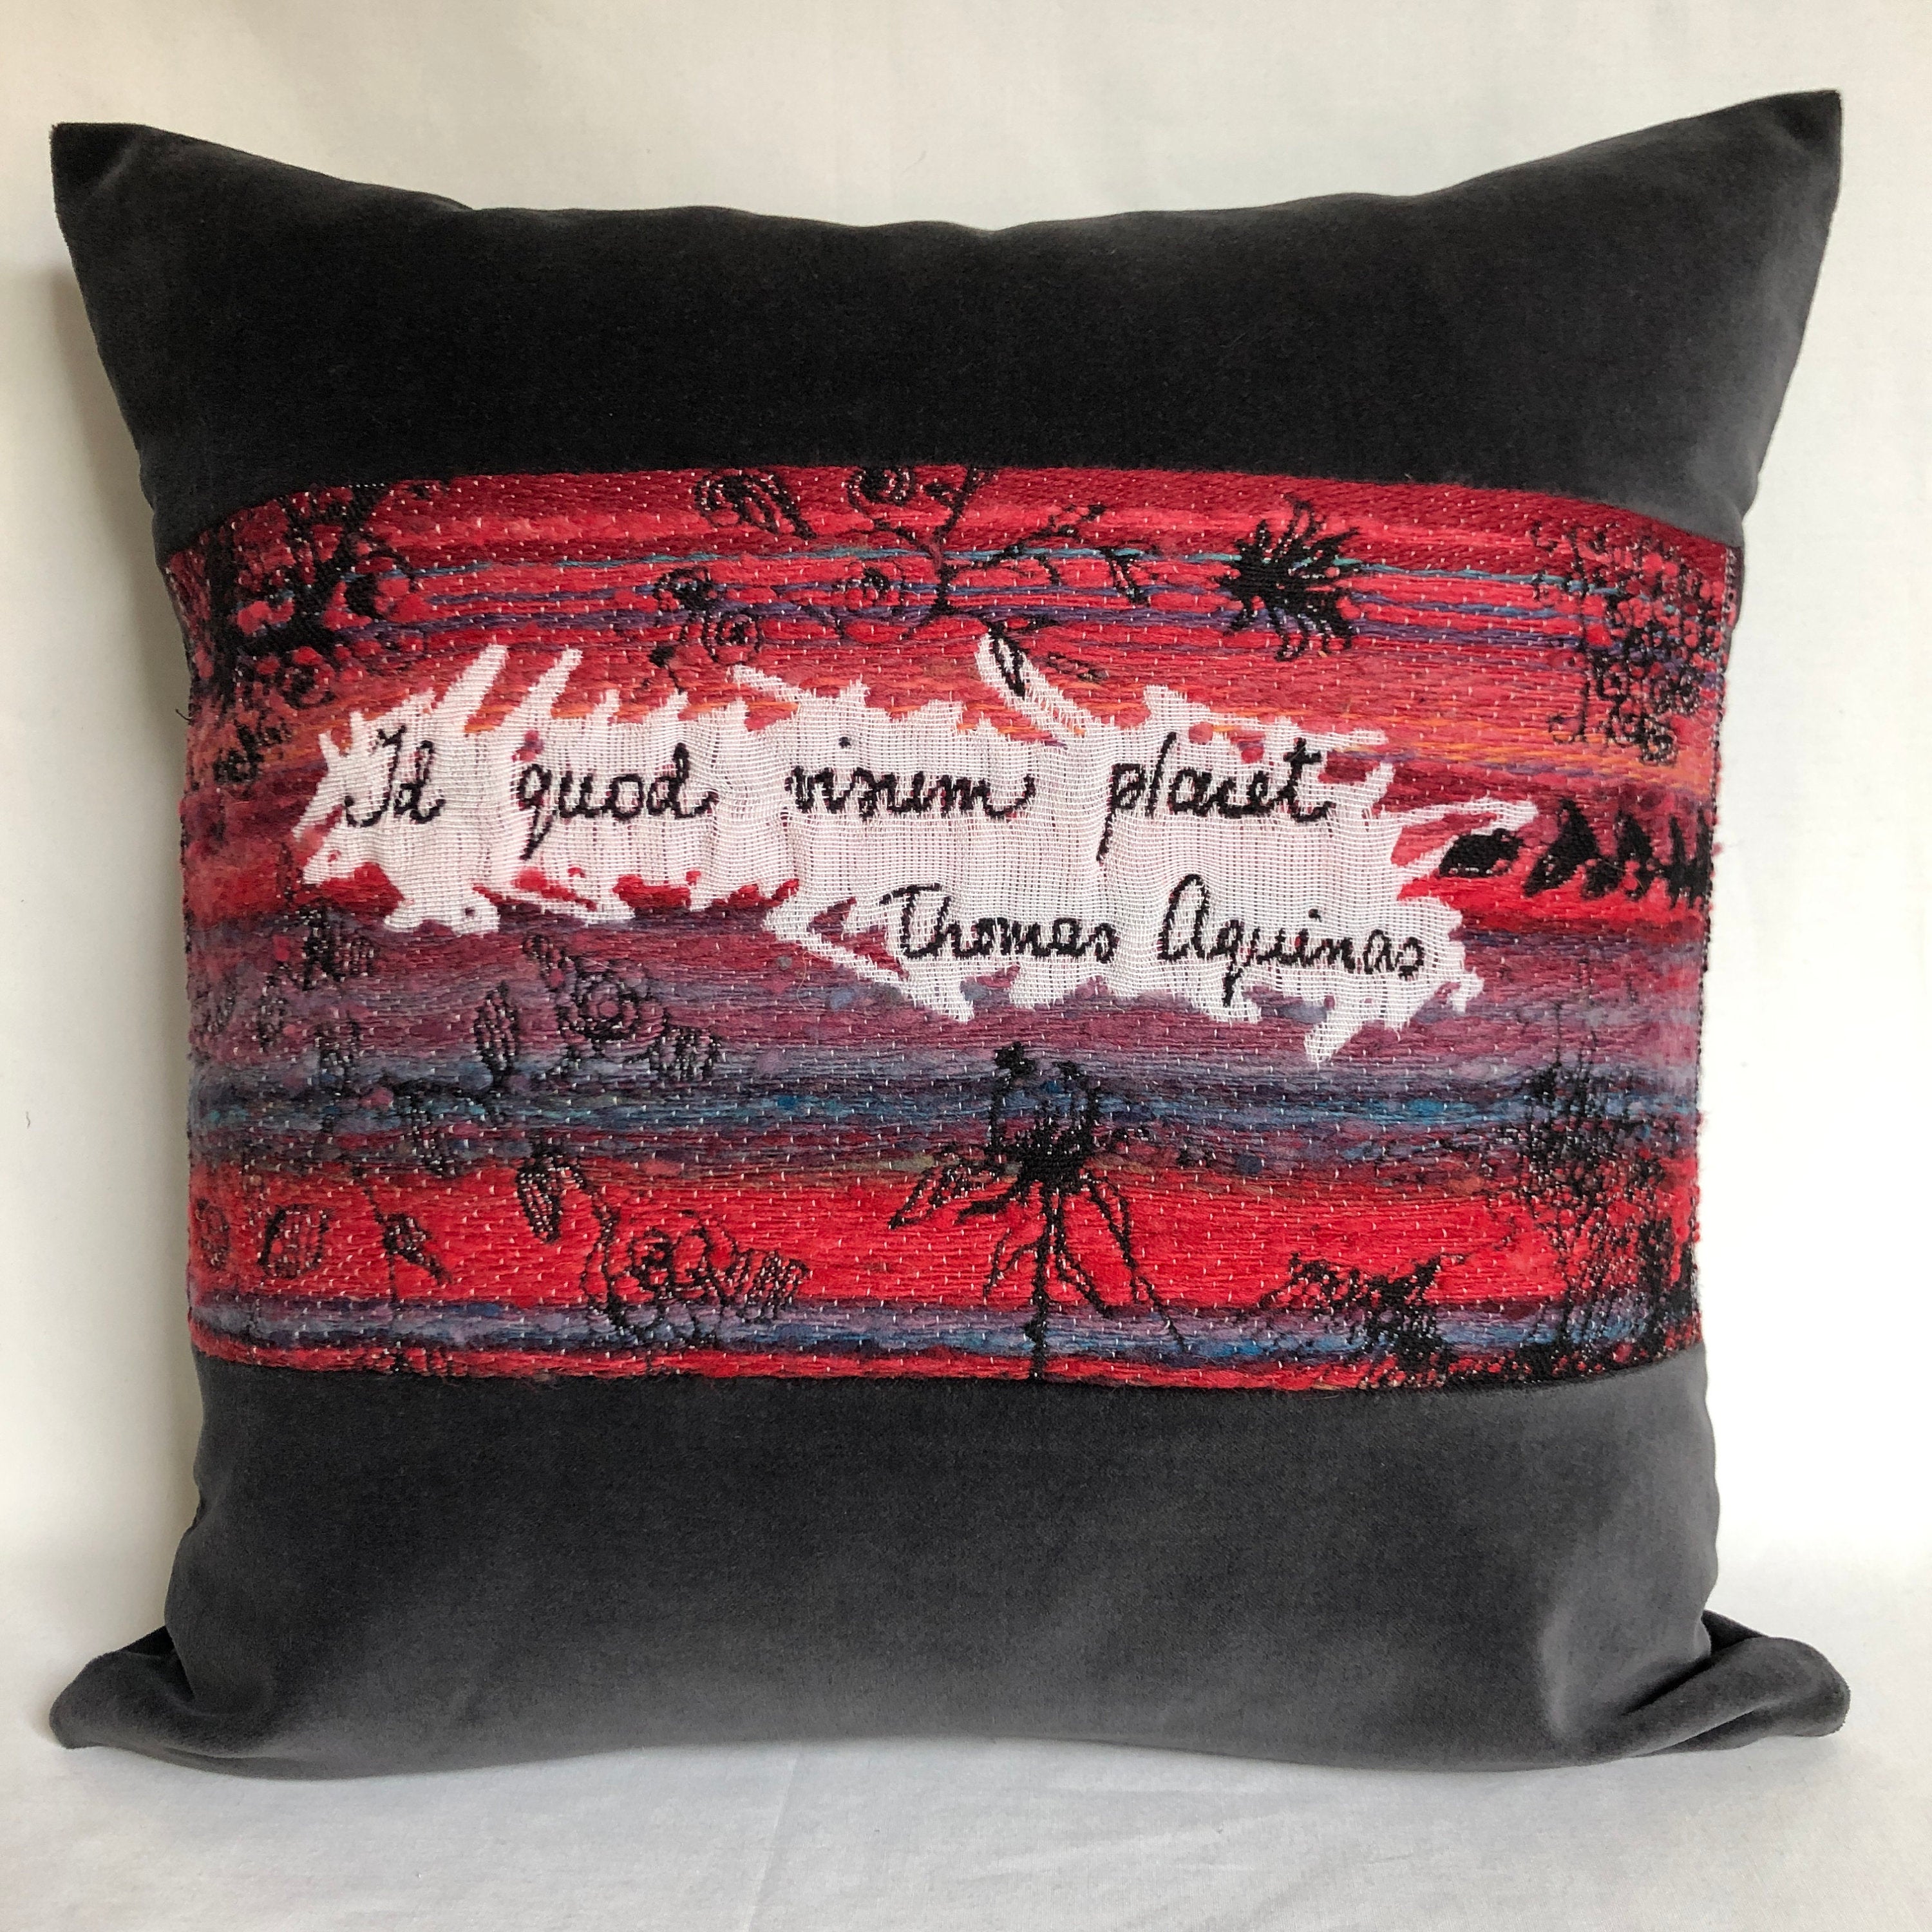 Definition of Beauty - Pillow Cover with Handwoven Jacquard Tapestry